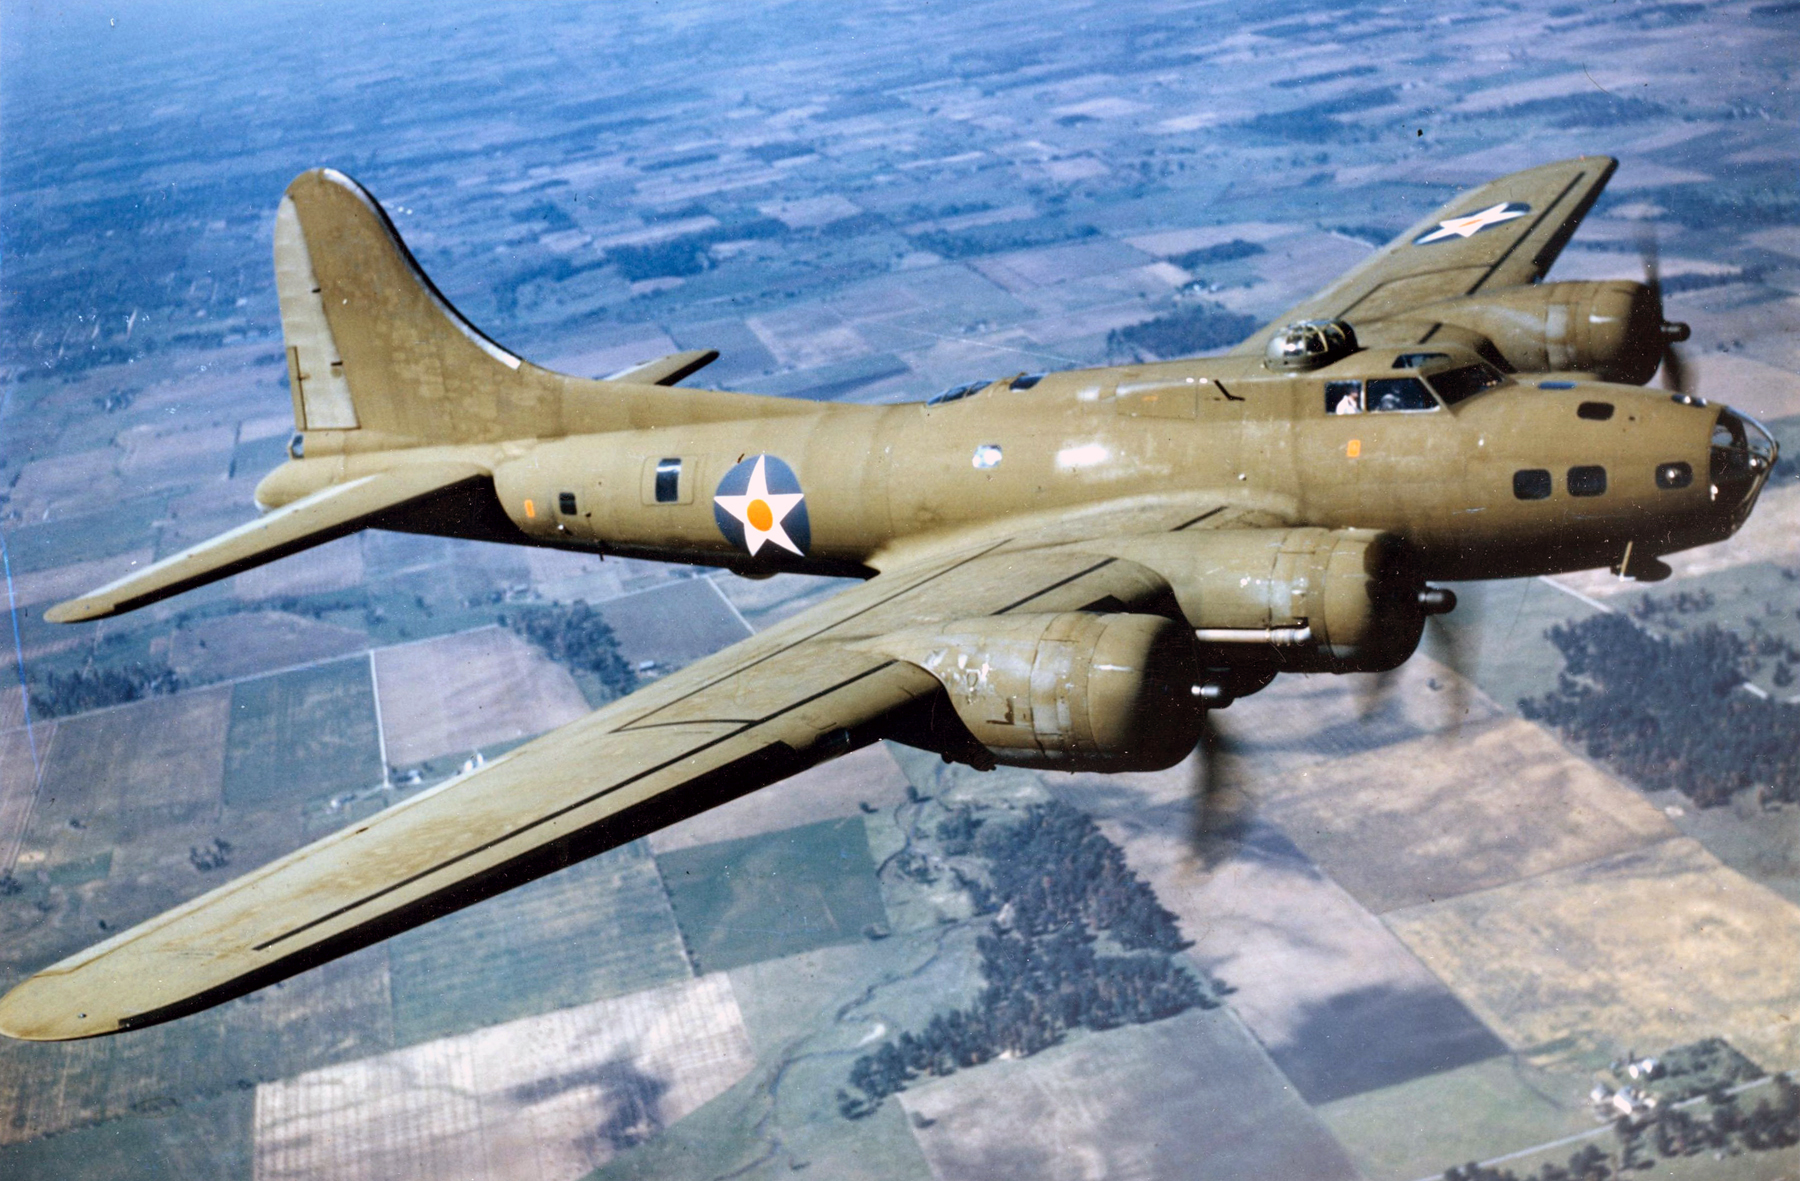 Boeing B-17 Flying Fortress #1